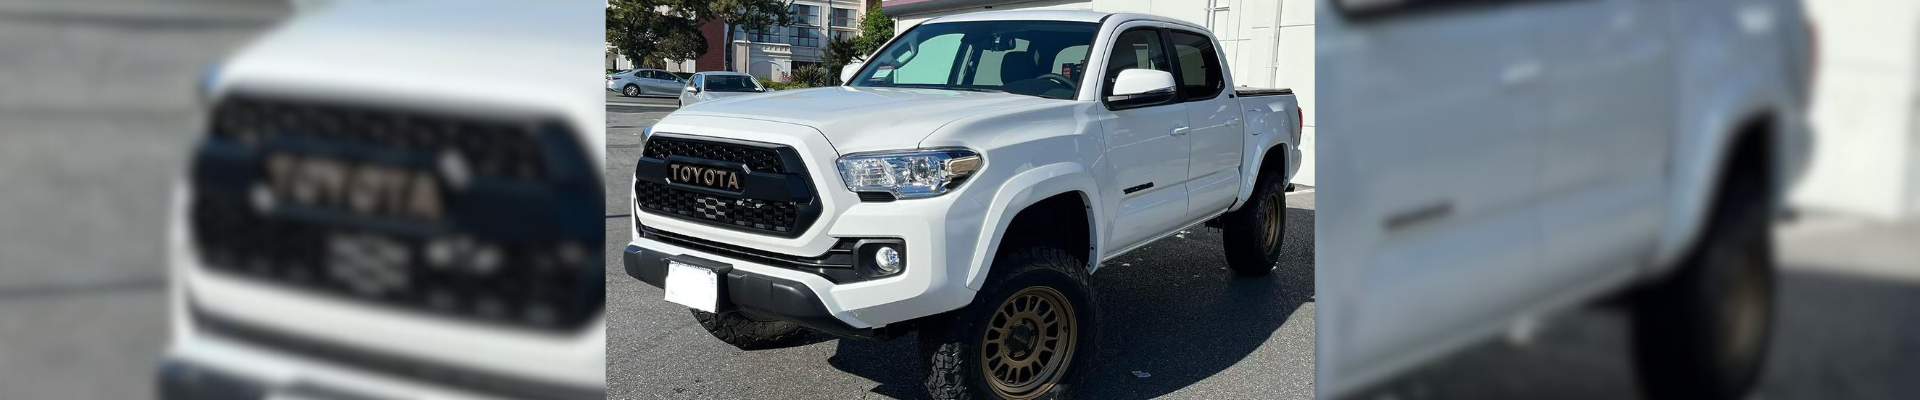 Toyota-Tacoma-gallery-image-1.png